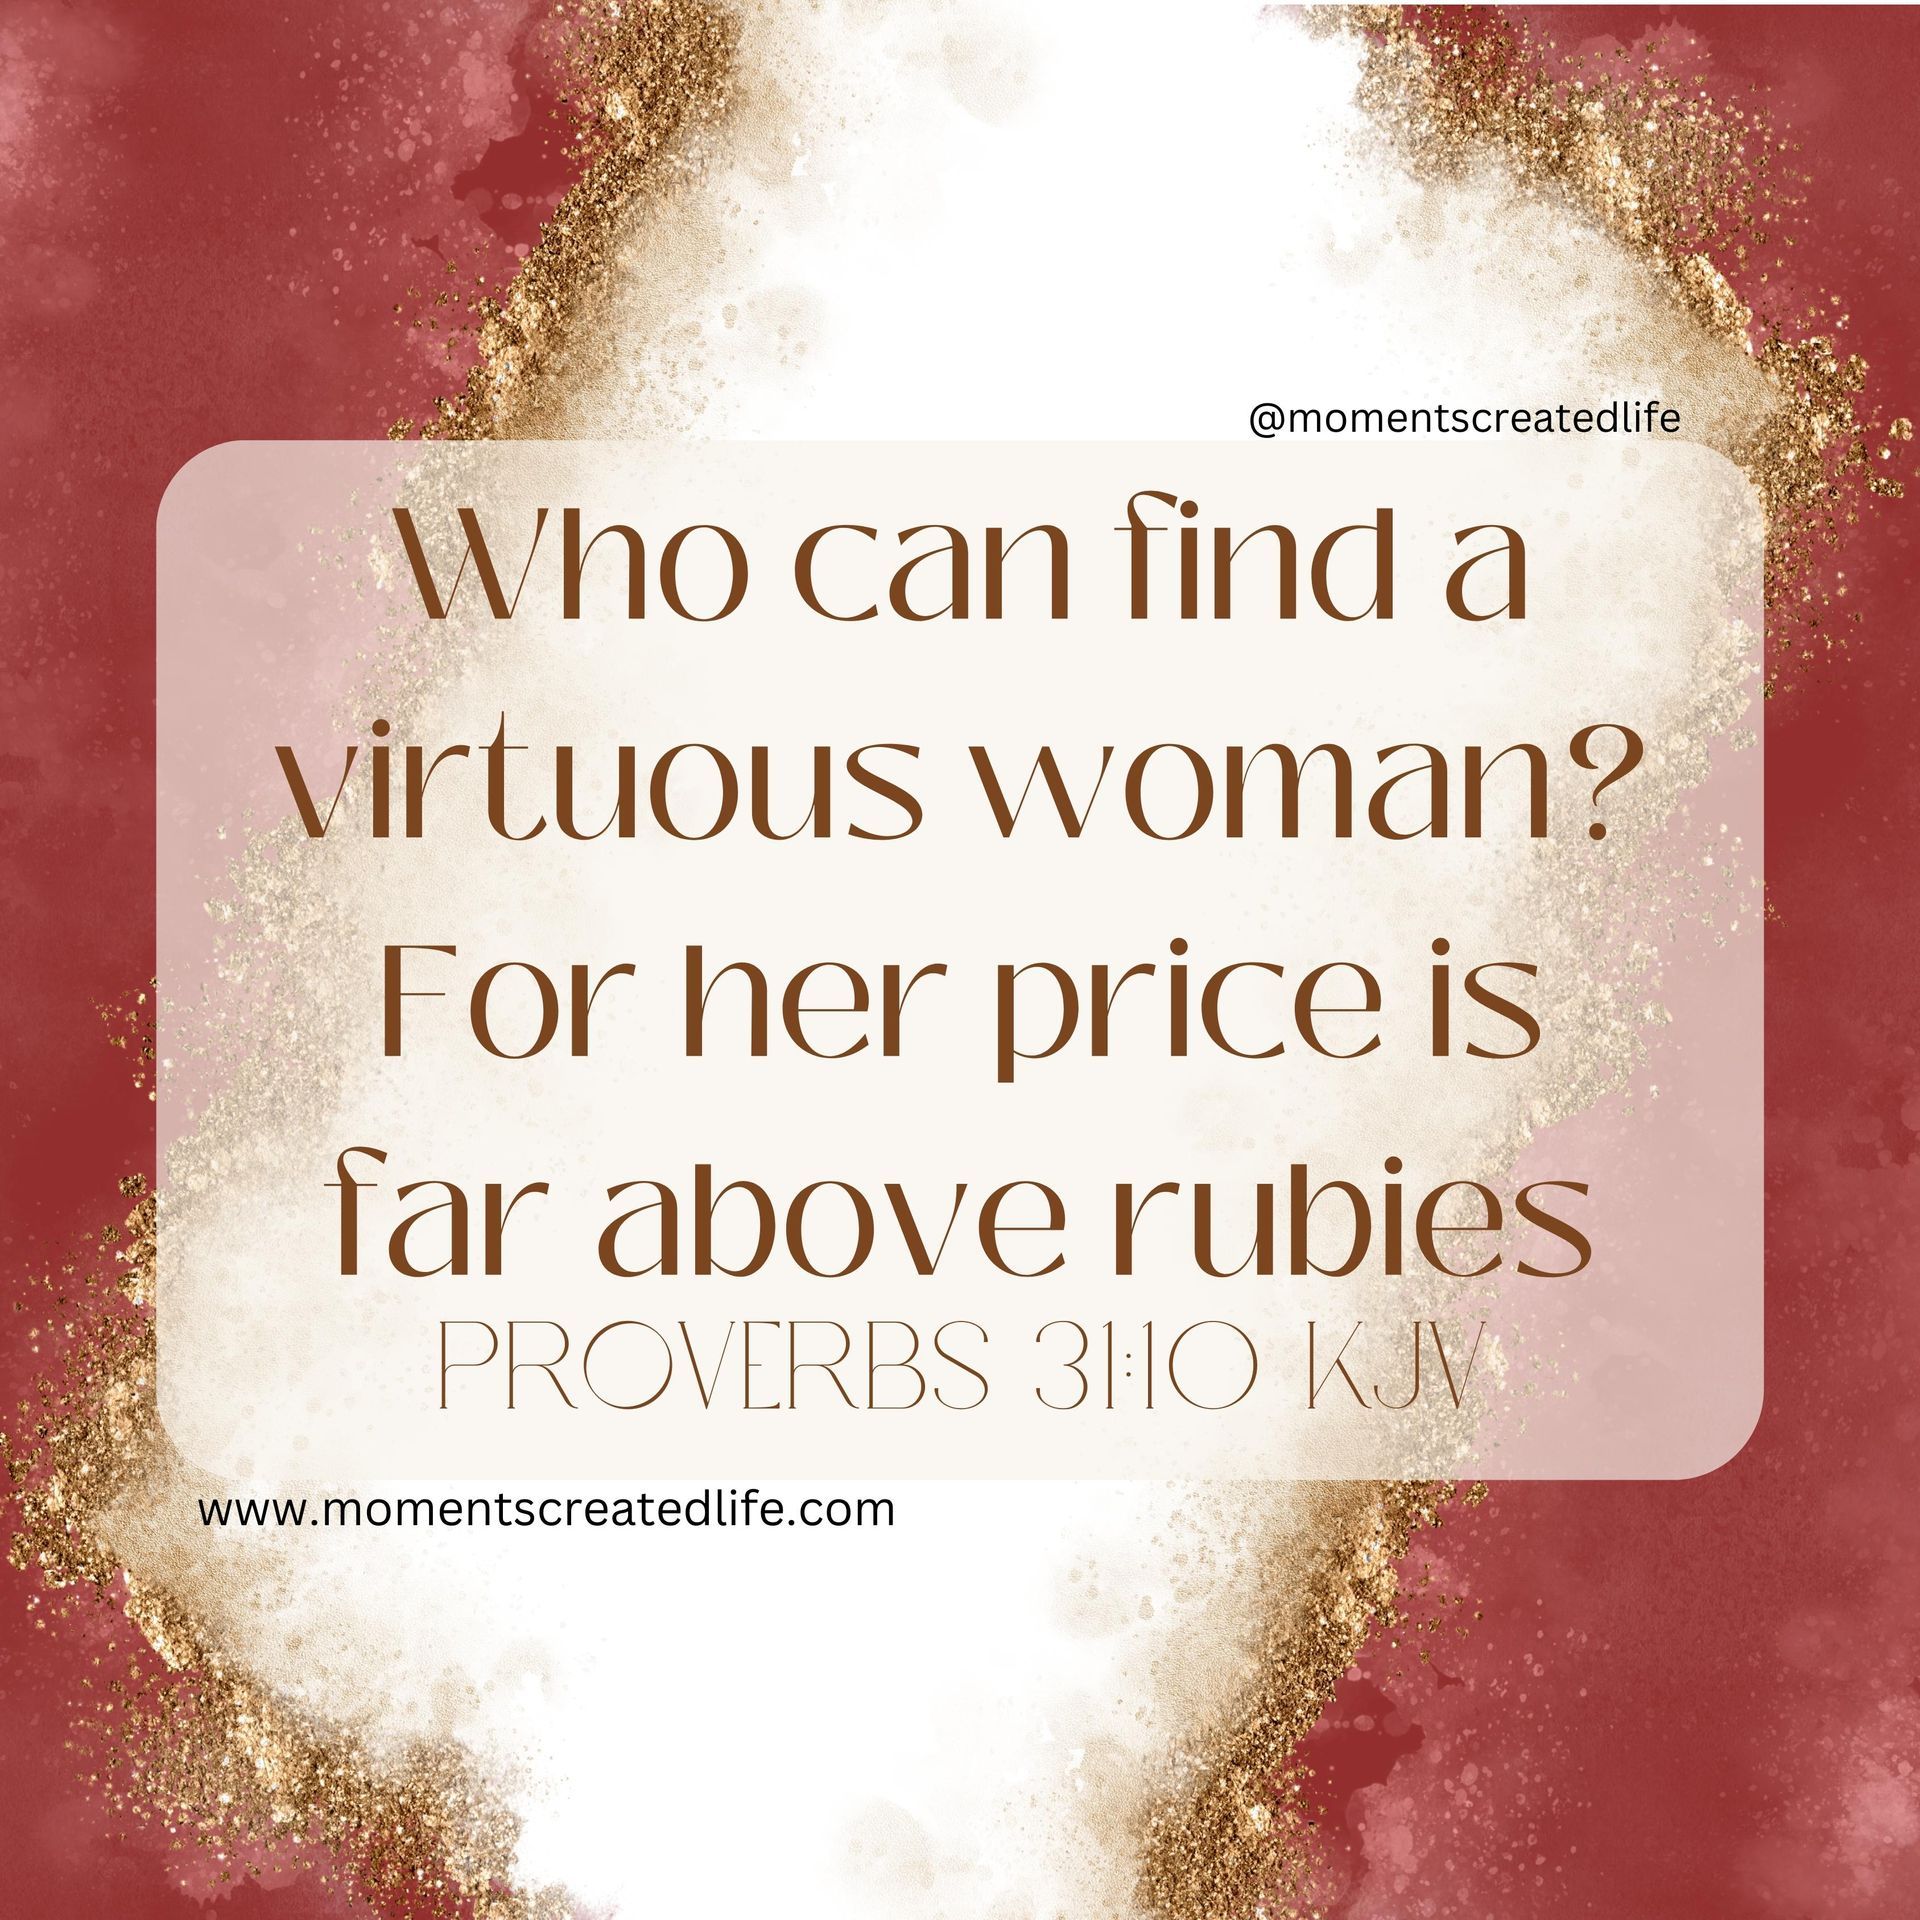 Proverbs 31:10 KJV Who can find a virtuous woman? For her price is far above rubies.